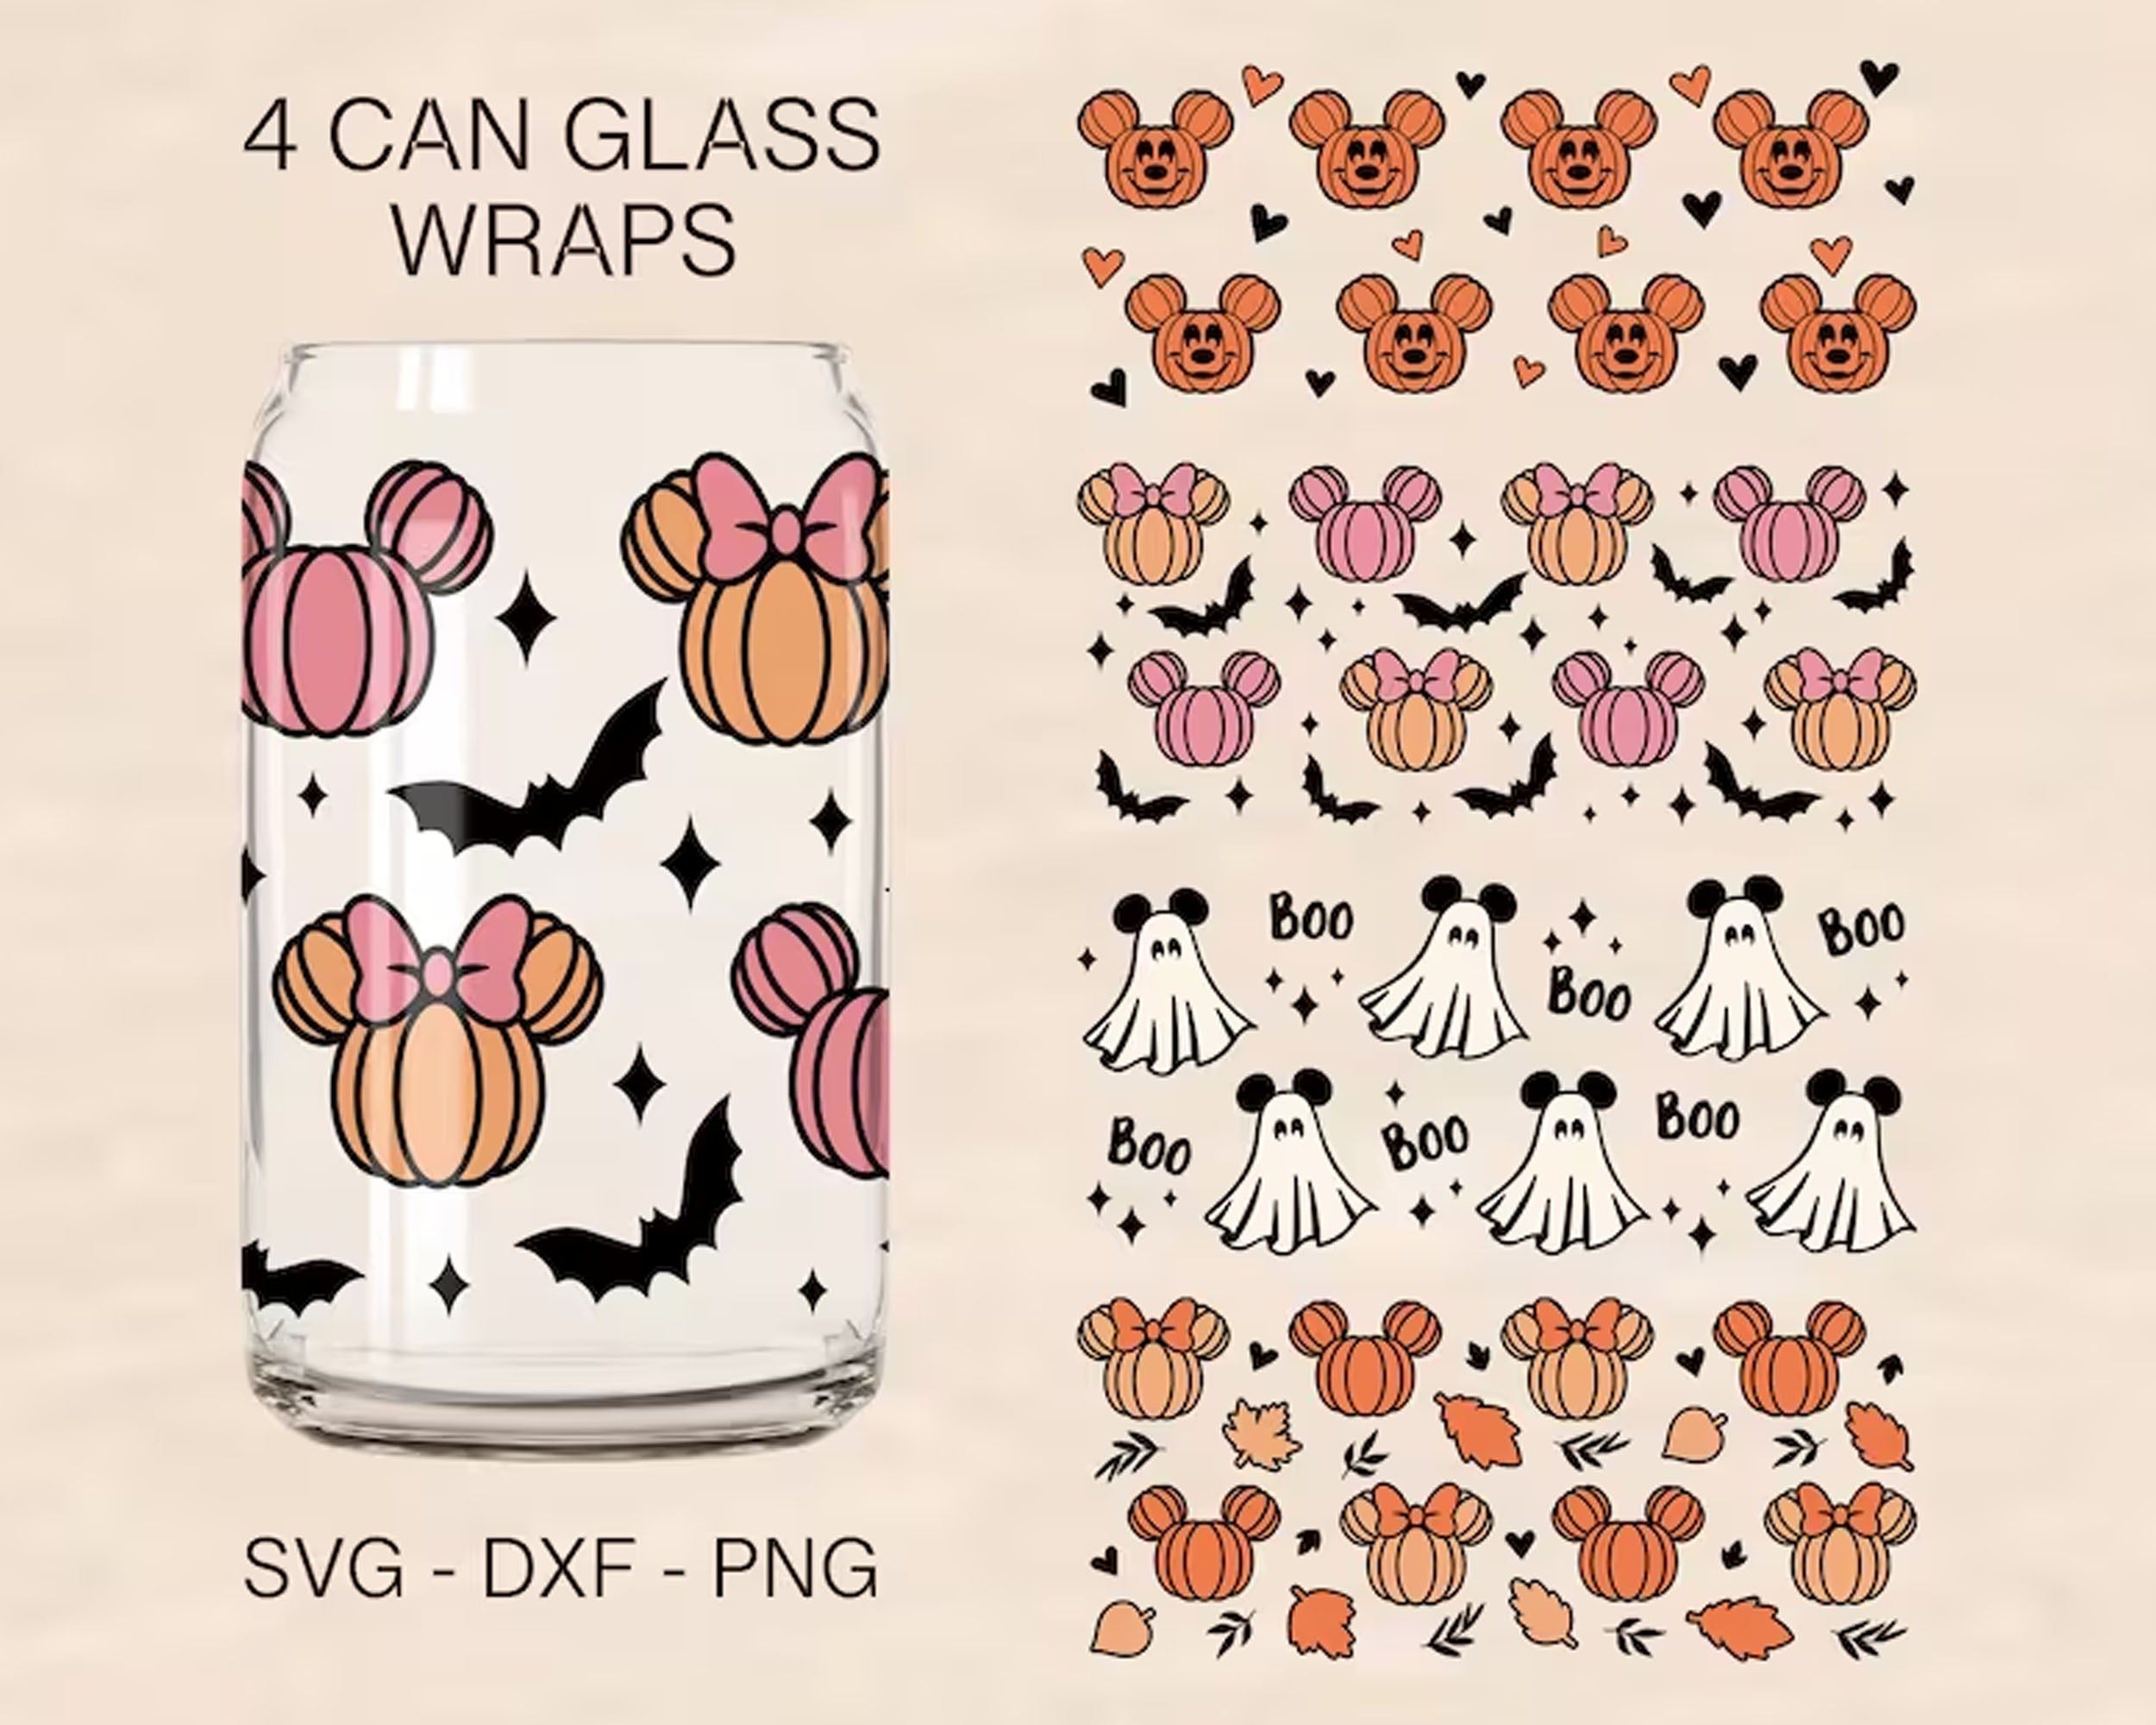 Halloween Mouse Ears Glass Wrap Svg, Mouse Ghosts Glass Wrap, Instant Download